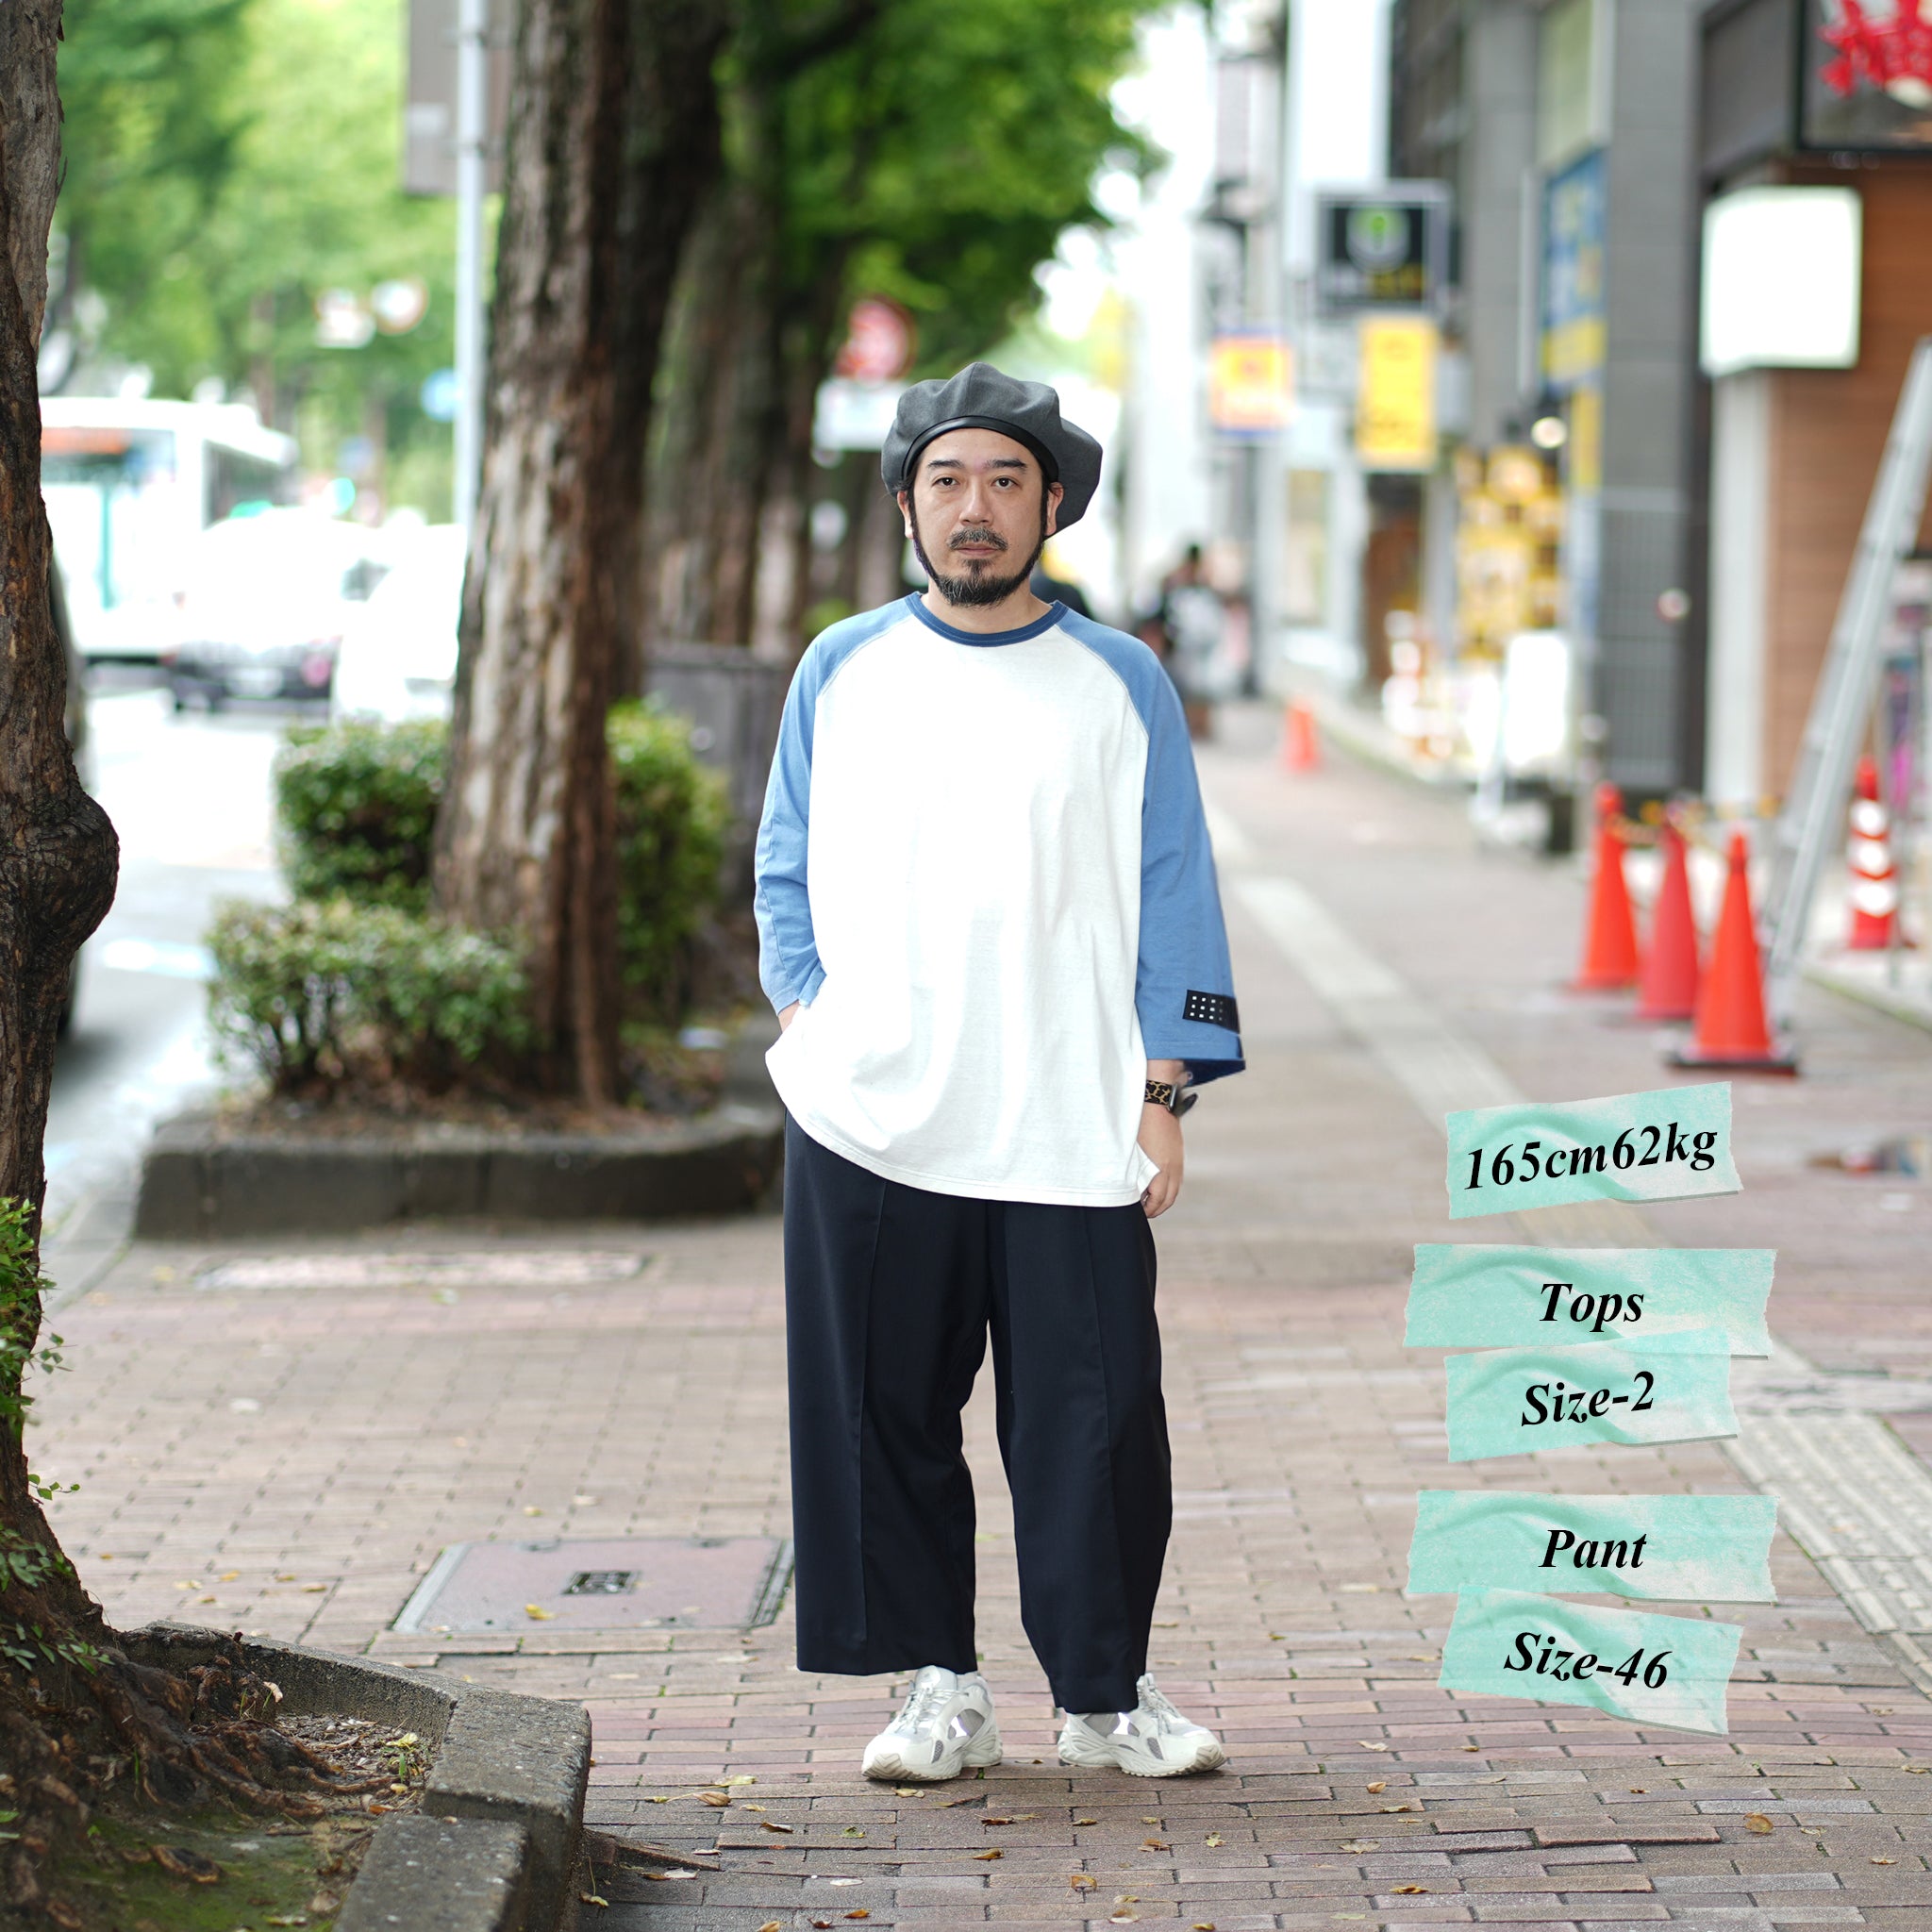 No:tb-t0201_Blue | Name:ALL ROUND TRAINER 3/4 T-shirts | Color:Blue【TRAINERBOYS_トレーナーボーイズ】